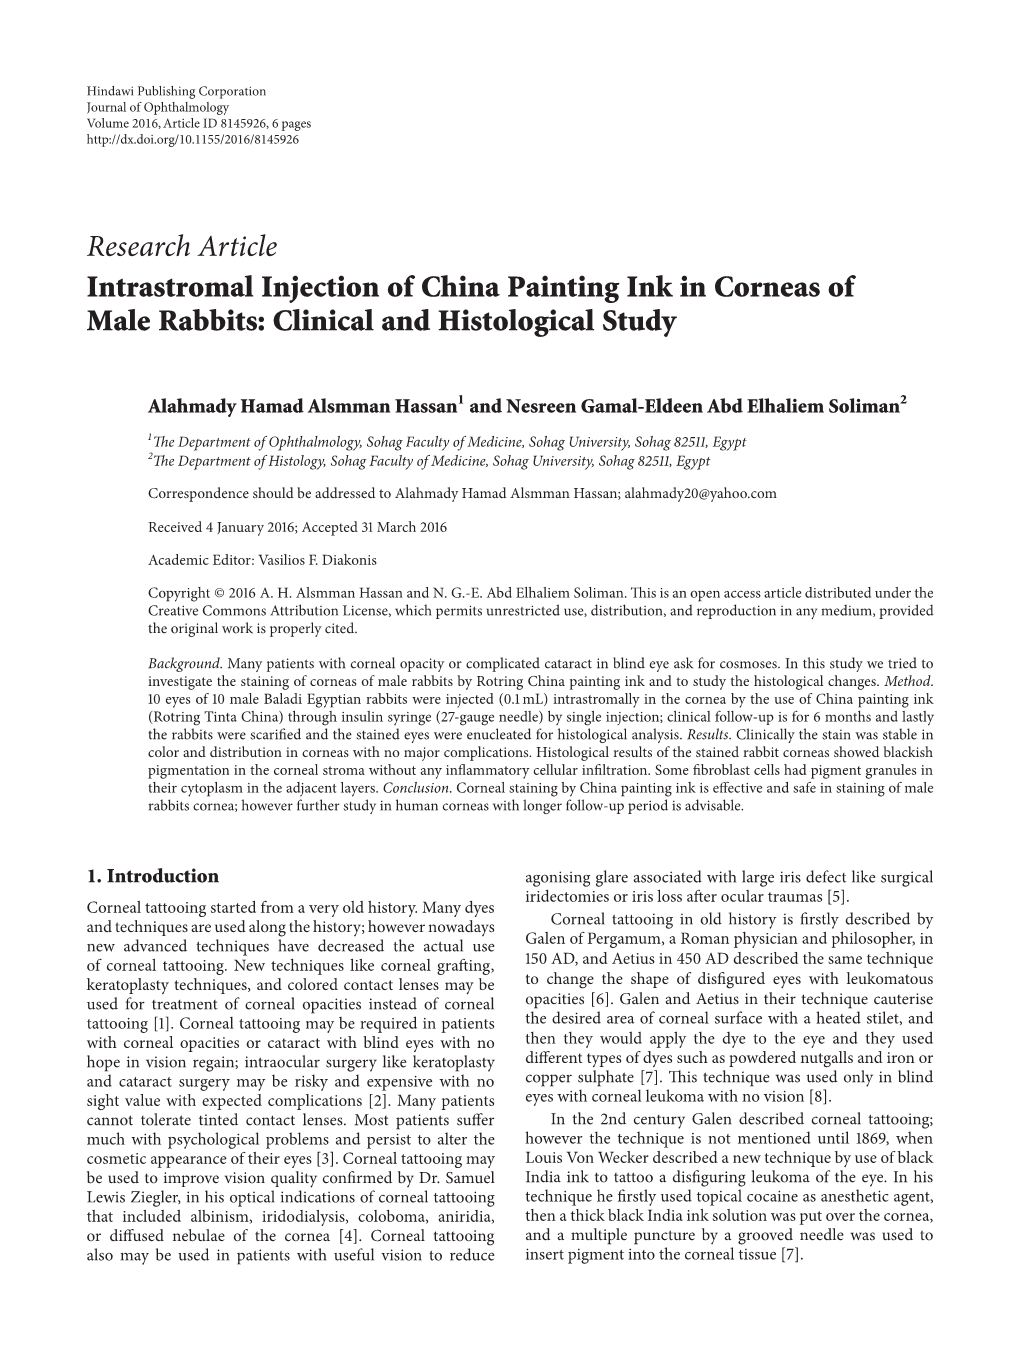 Intrastromal Injection of China Painting Ink in Corneas of Male Rabbits: Clinical and Histological Study